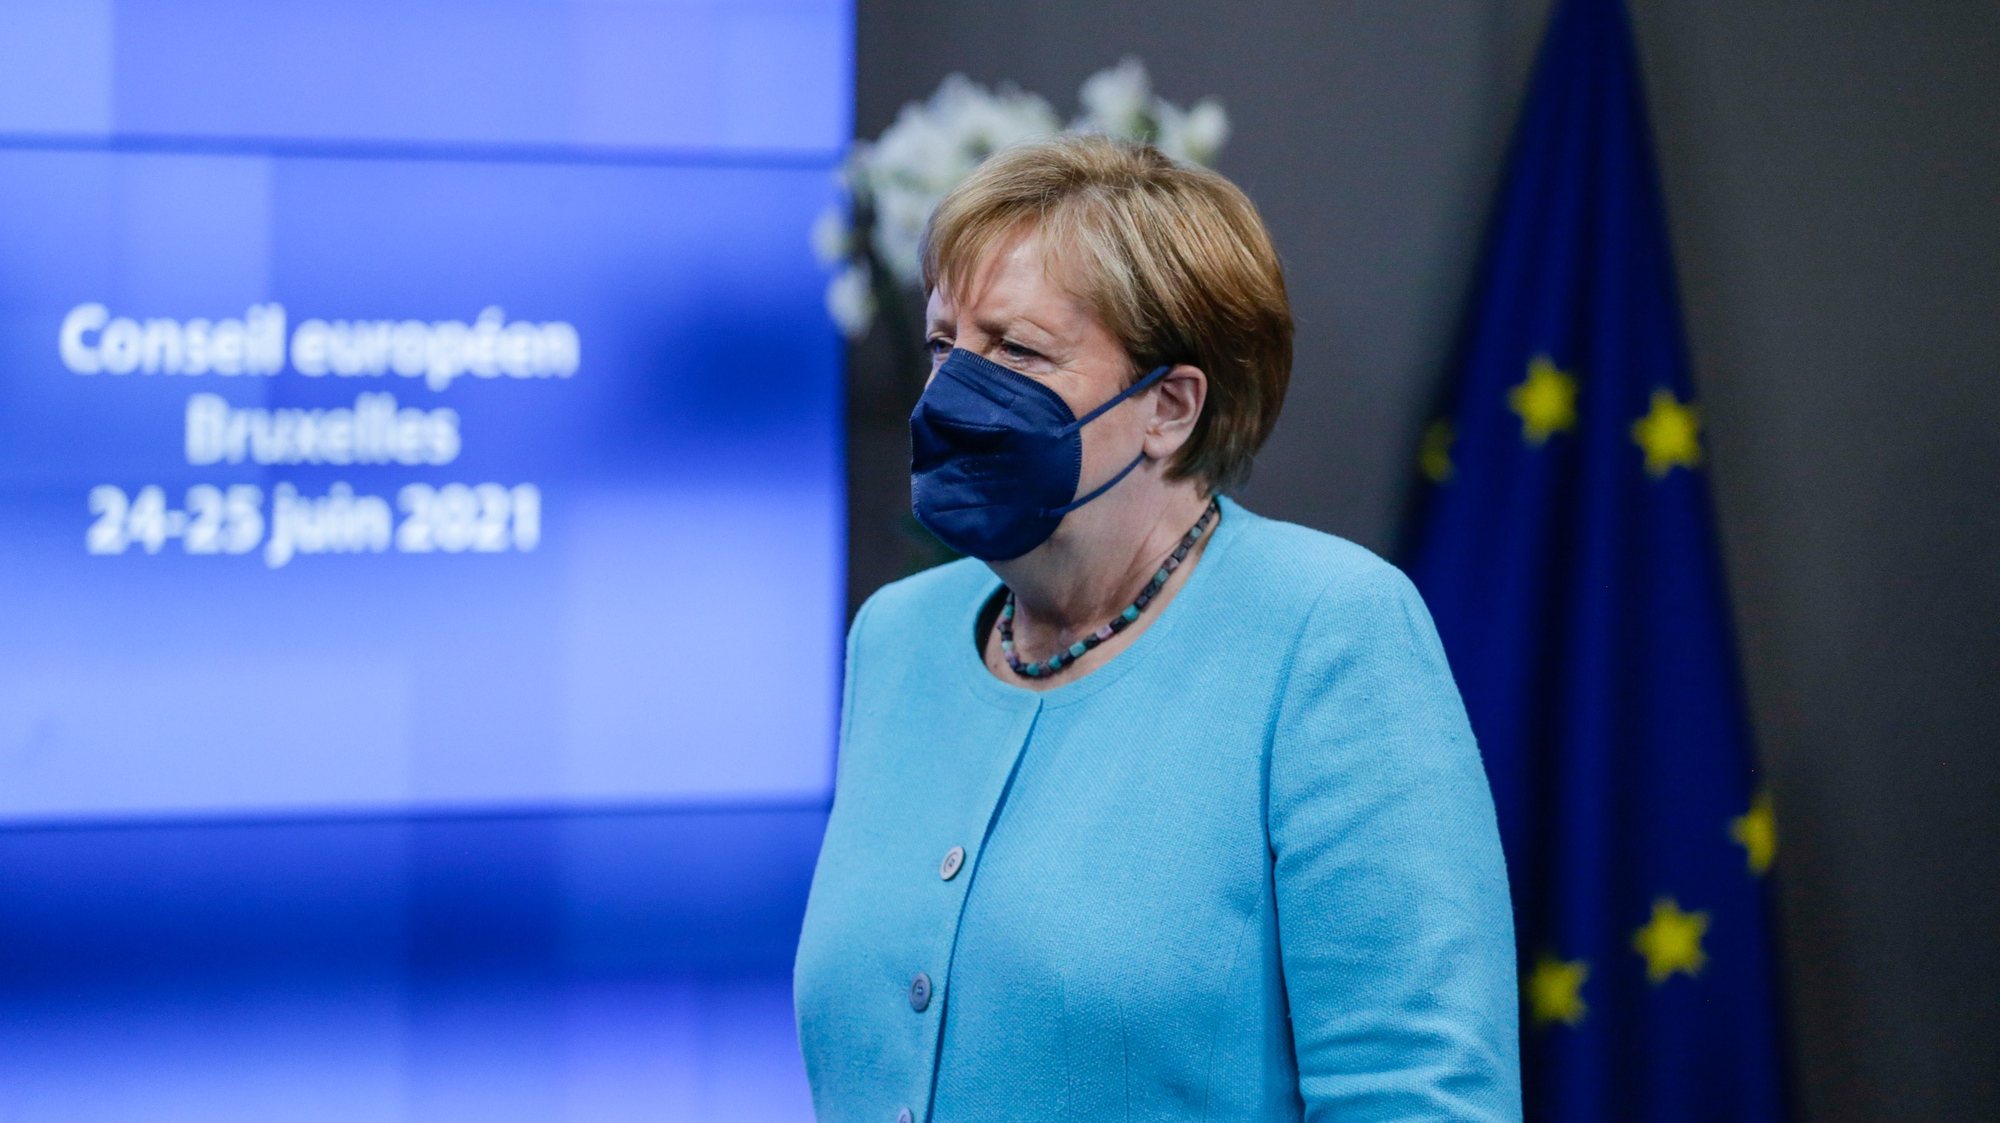 epa09299939 German Chancellor Angela Merkel leaves at the end of the first day of a European Union leaders meeting in Brussels, Belgium, 24 June 2021. EU leaders meet in Brussels for two days to discuss COVID-19, economic recovery, migration and external relations.  EPA/ARIS OIKONOMOU / POOL